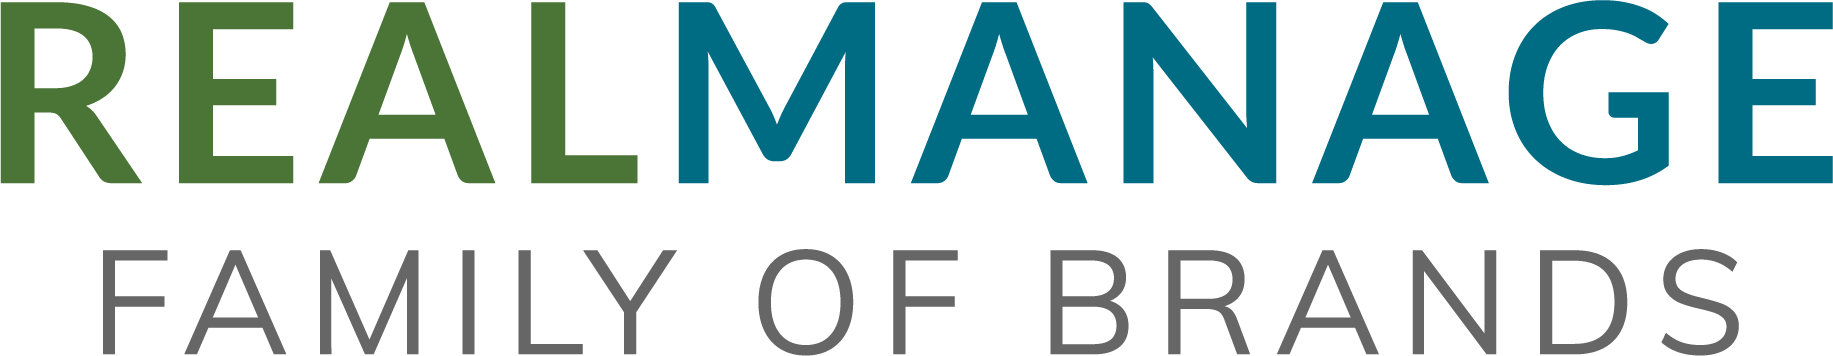 RealManage Family of Brands -  IL logo